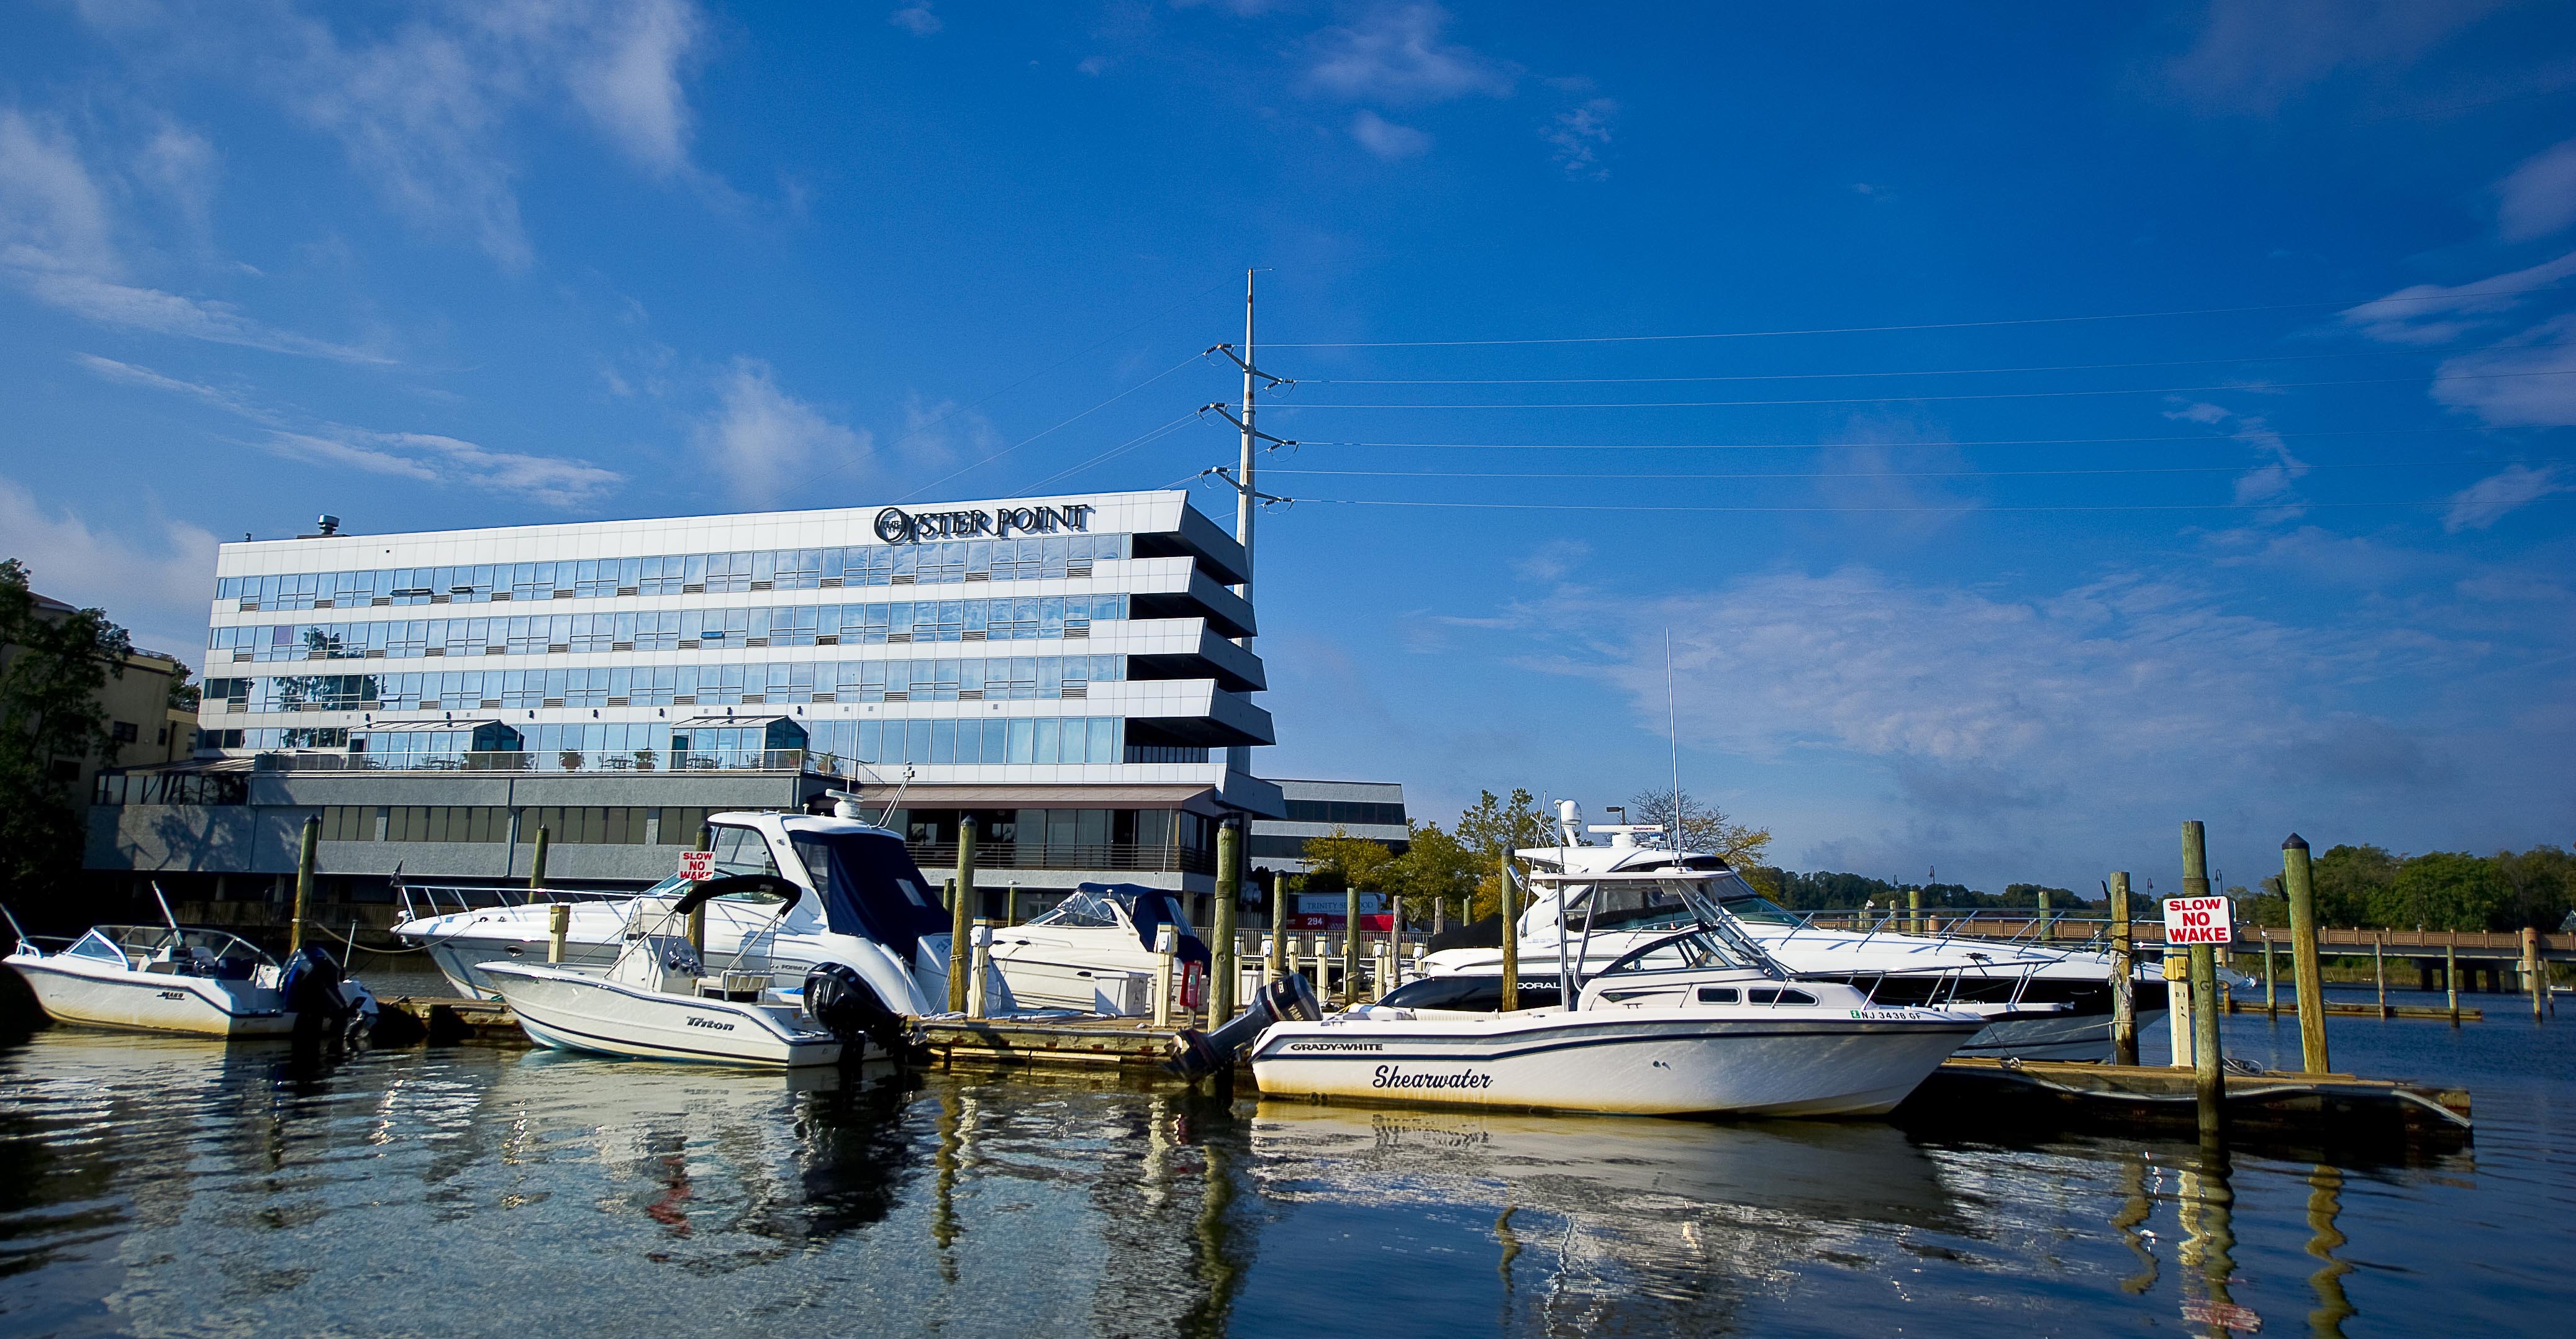 Oyster Point Hotel & Marina in Red Bank, NJ